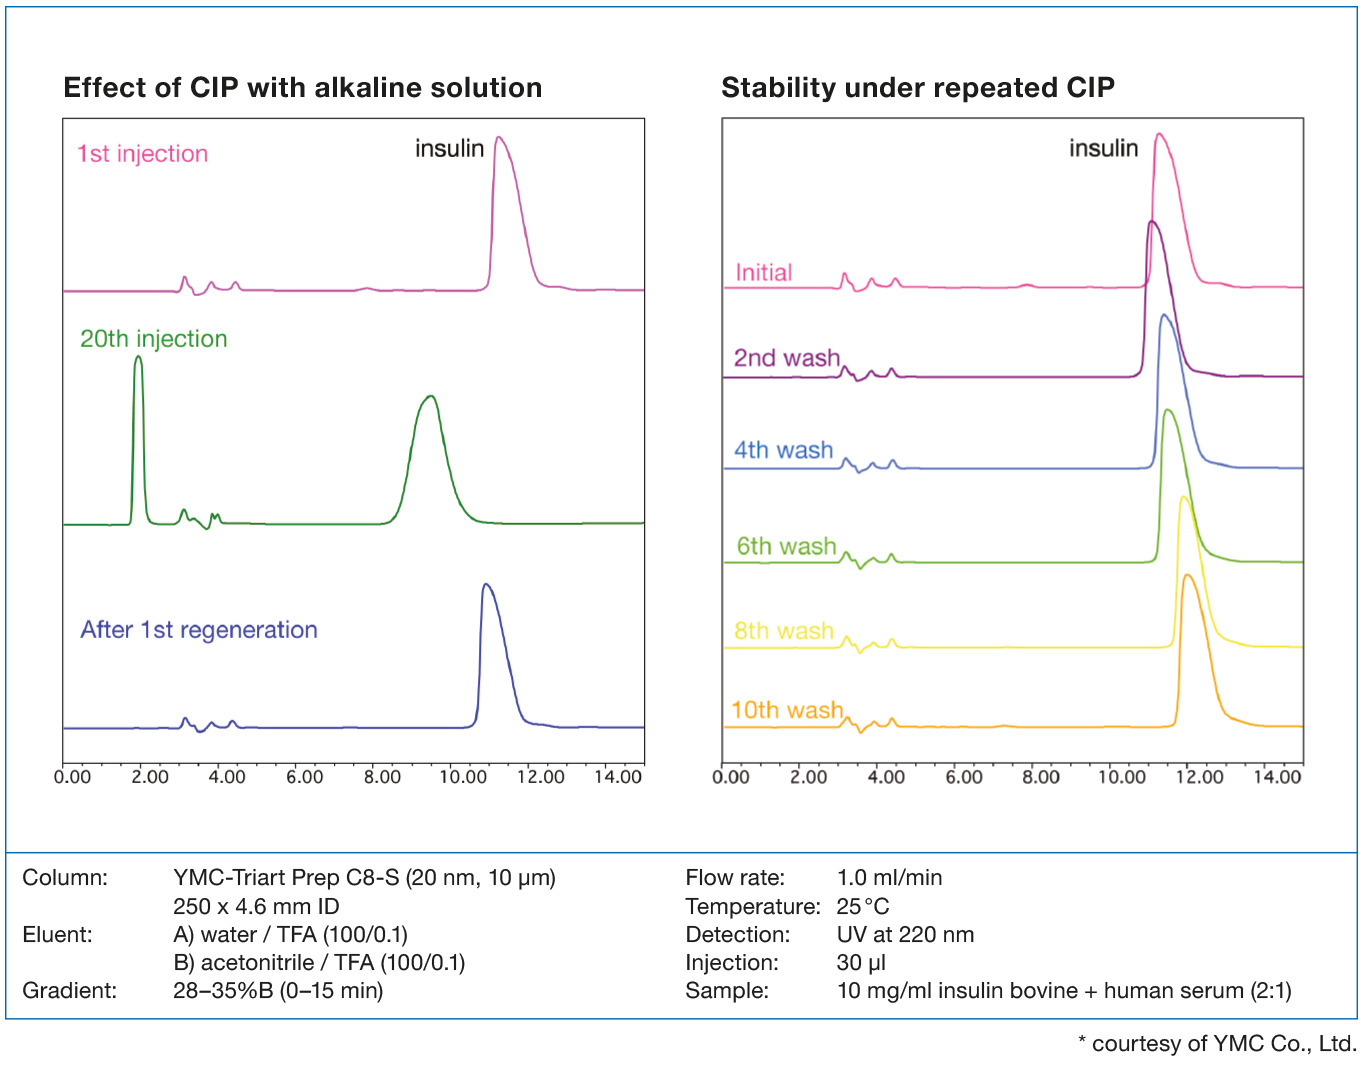 The image shows how the chromatographic performance of a HPLC-column packed with YMC-Triart Prep C8-S used in an insulin purification could be restored by alkaline washing steps with 0.1 M NaOH. The high CIP-stability of the material leads to good separat